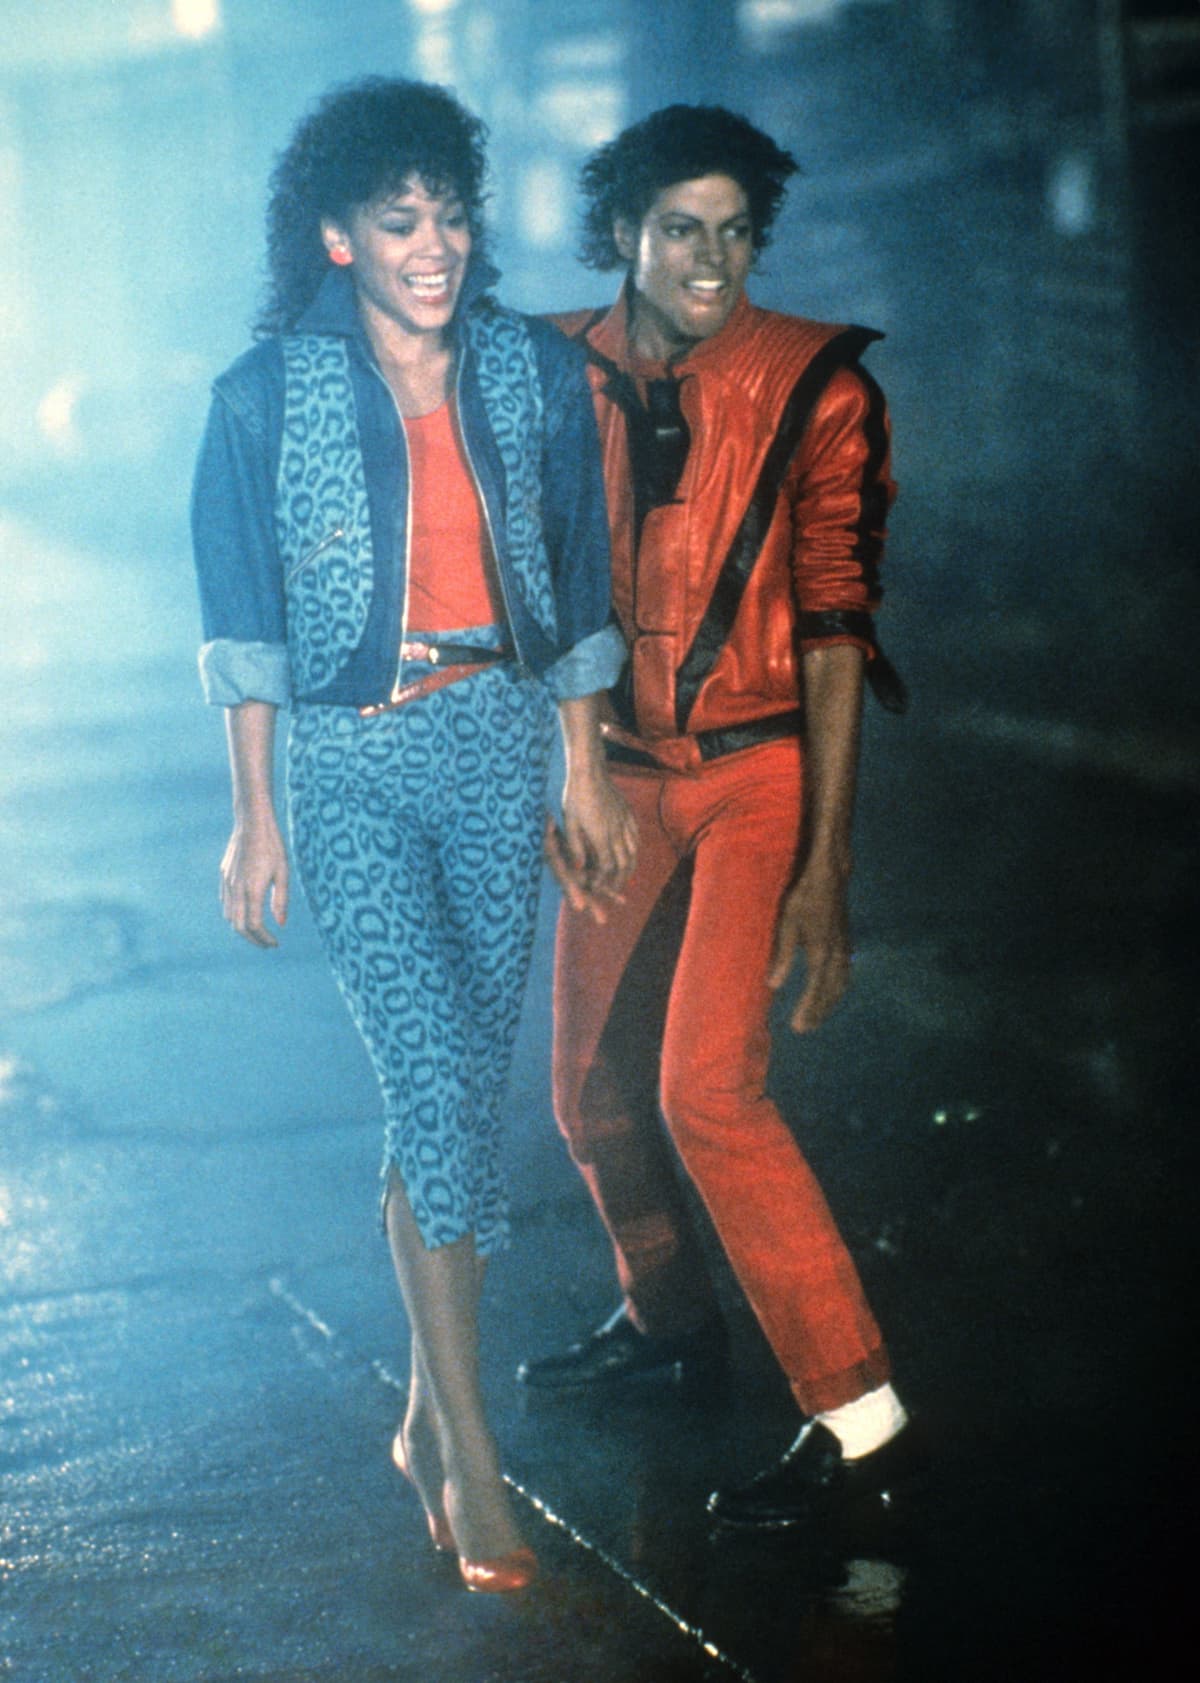 Michael Jackson and Ola Ray on the street in Thriller